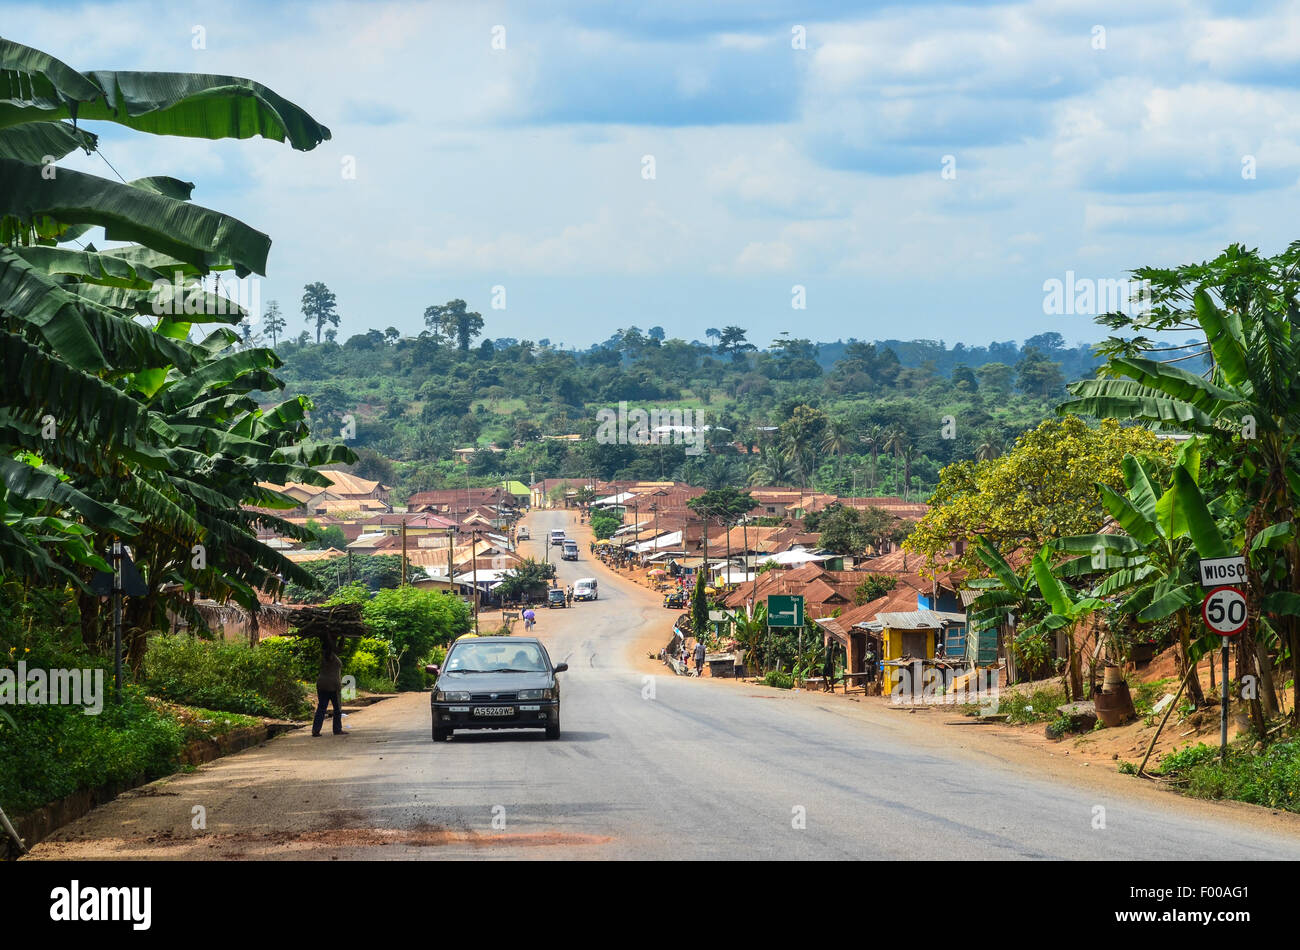 Views of rural Ghana, a road crossing a village Stock Photo